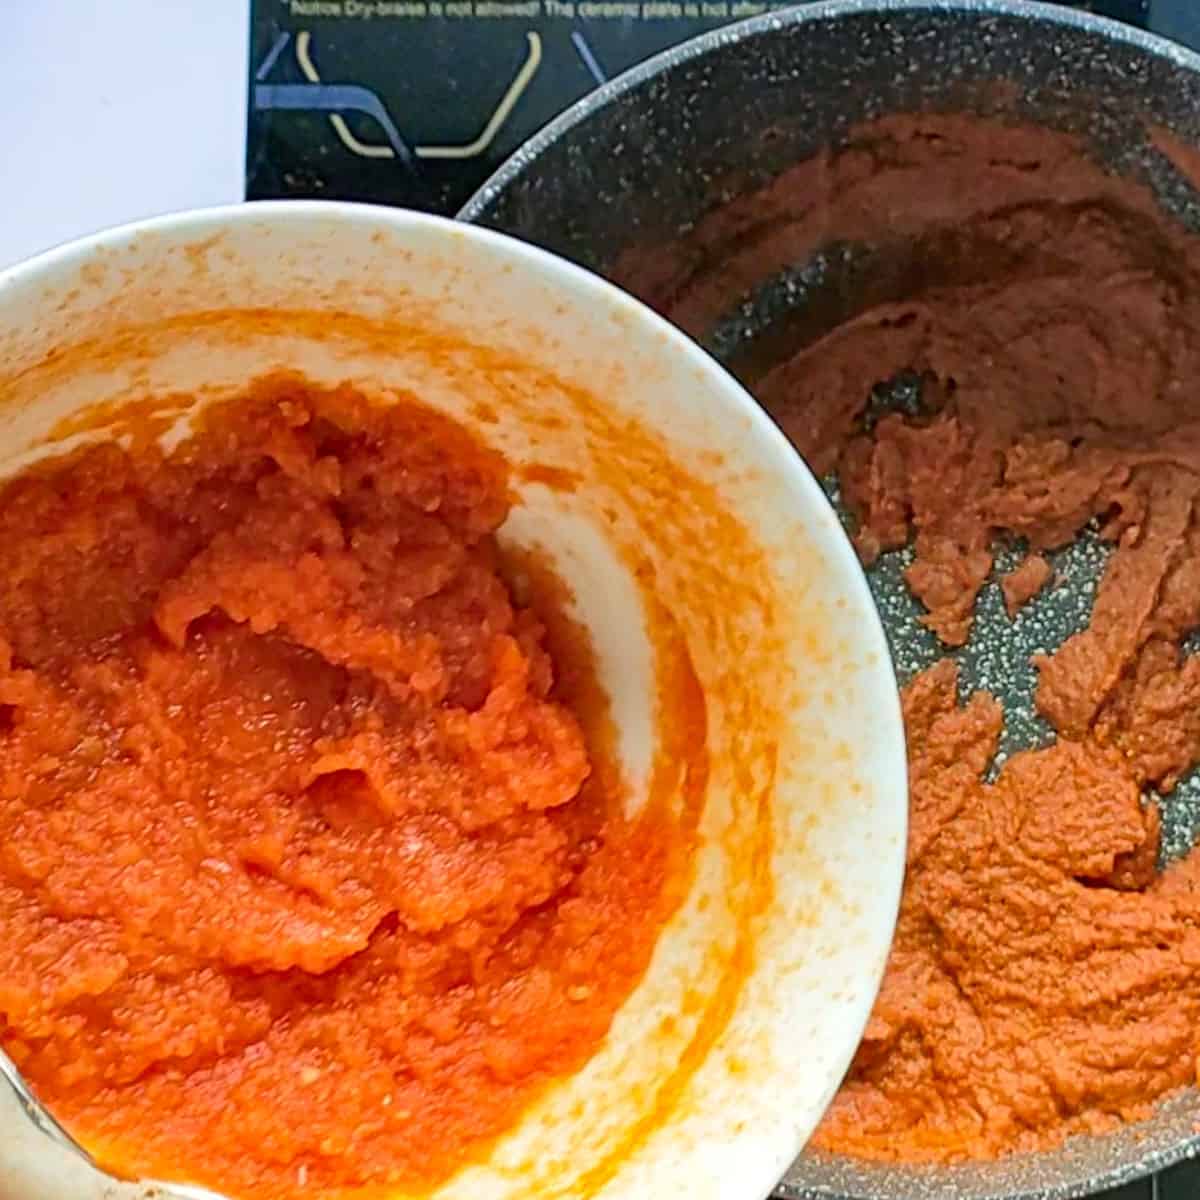 Tomato paste being added to fish masala in a cooking pot.